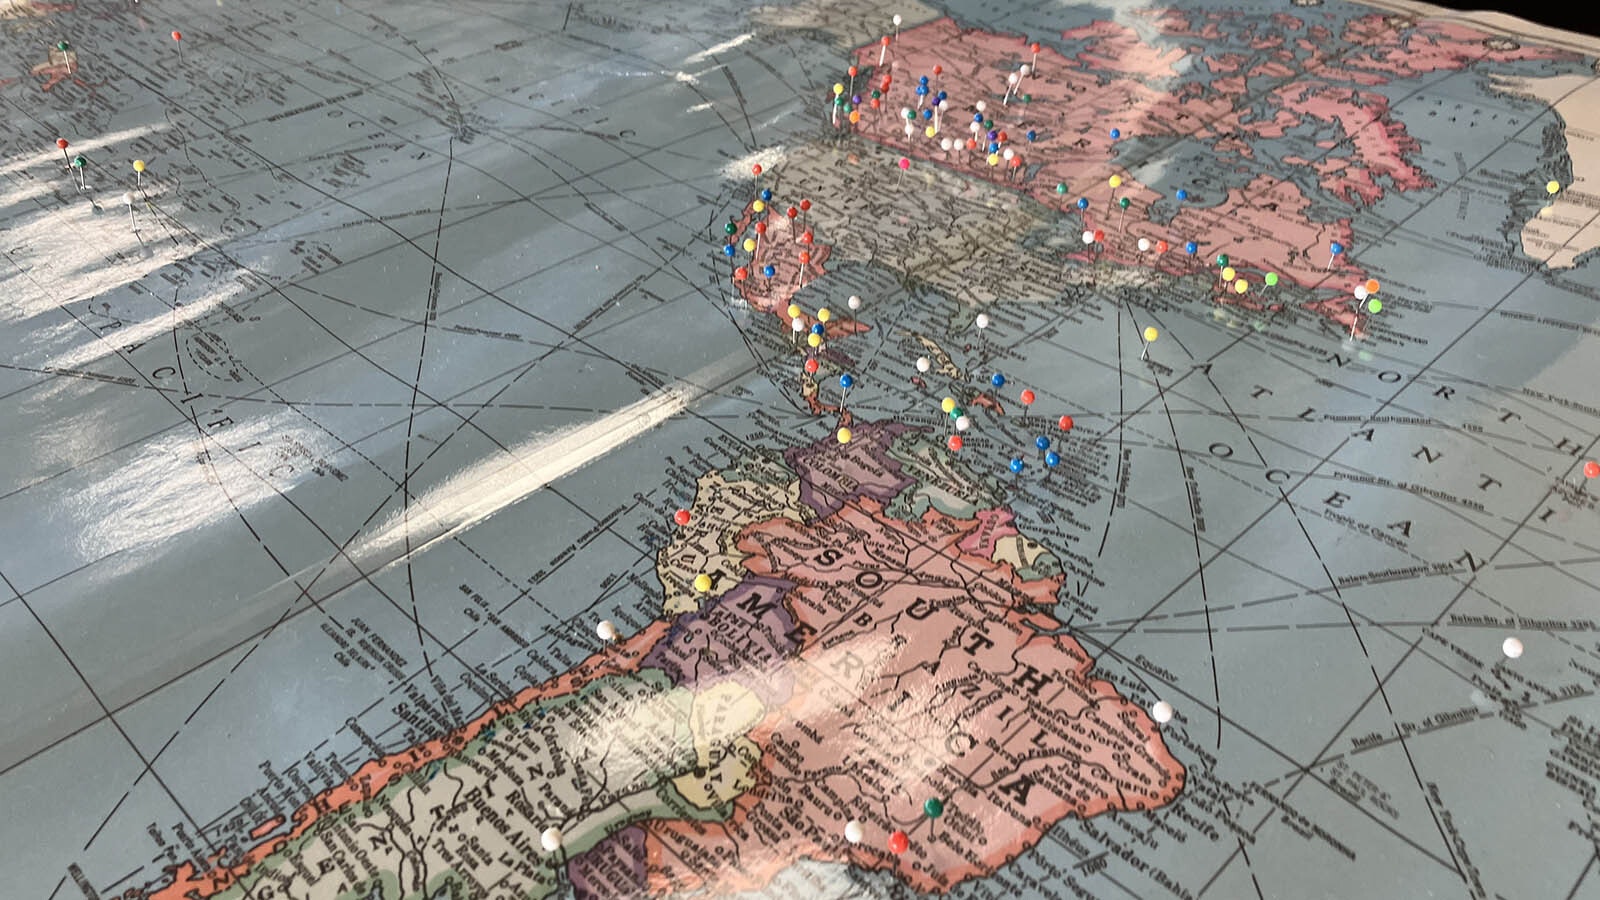 A map in the customs office has pins showing where flights have originated from over the years.